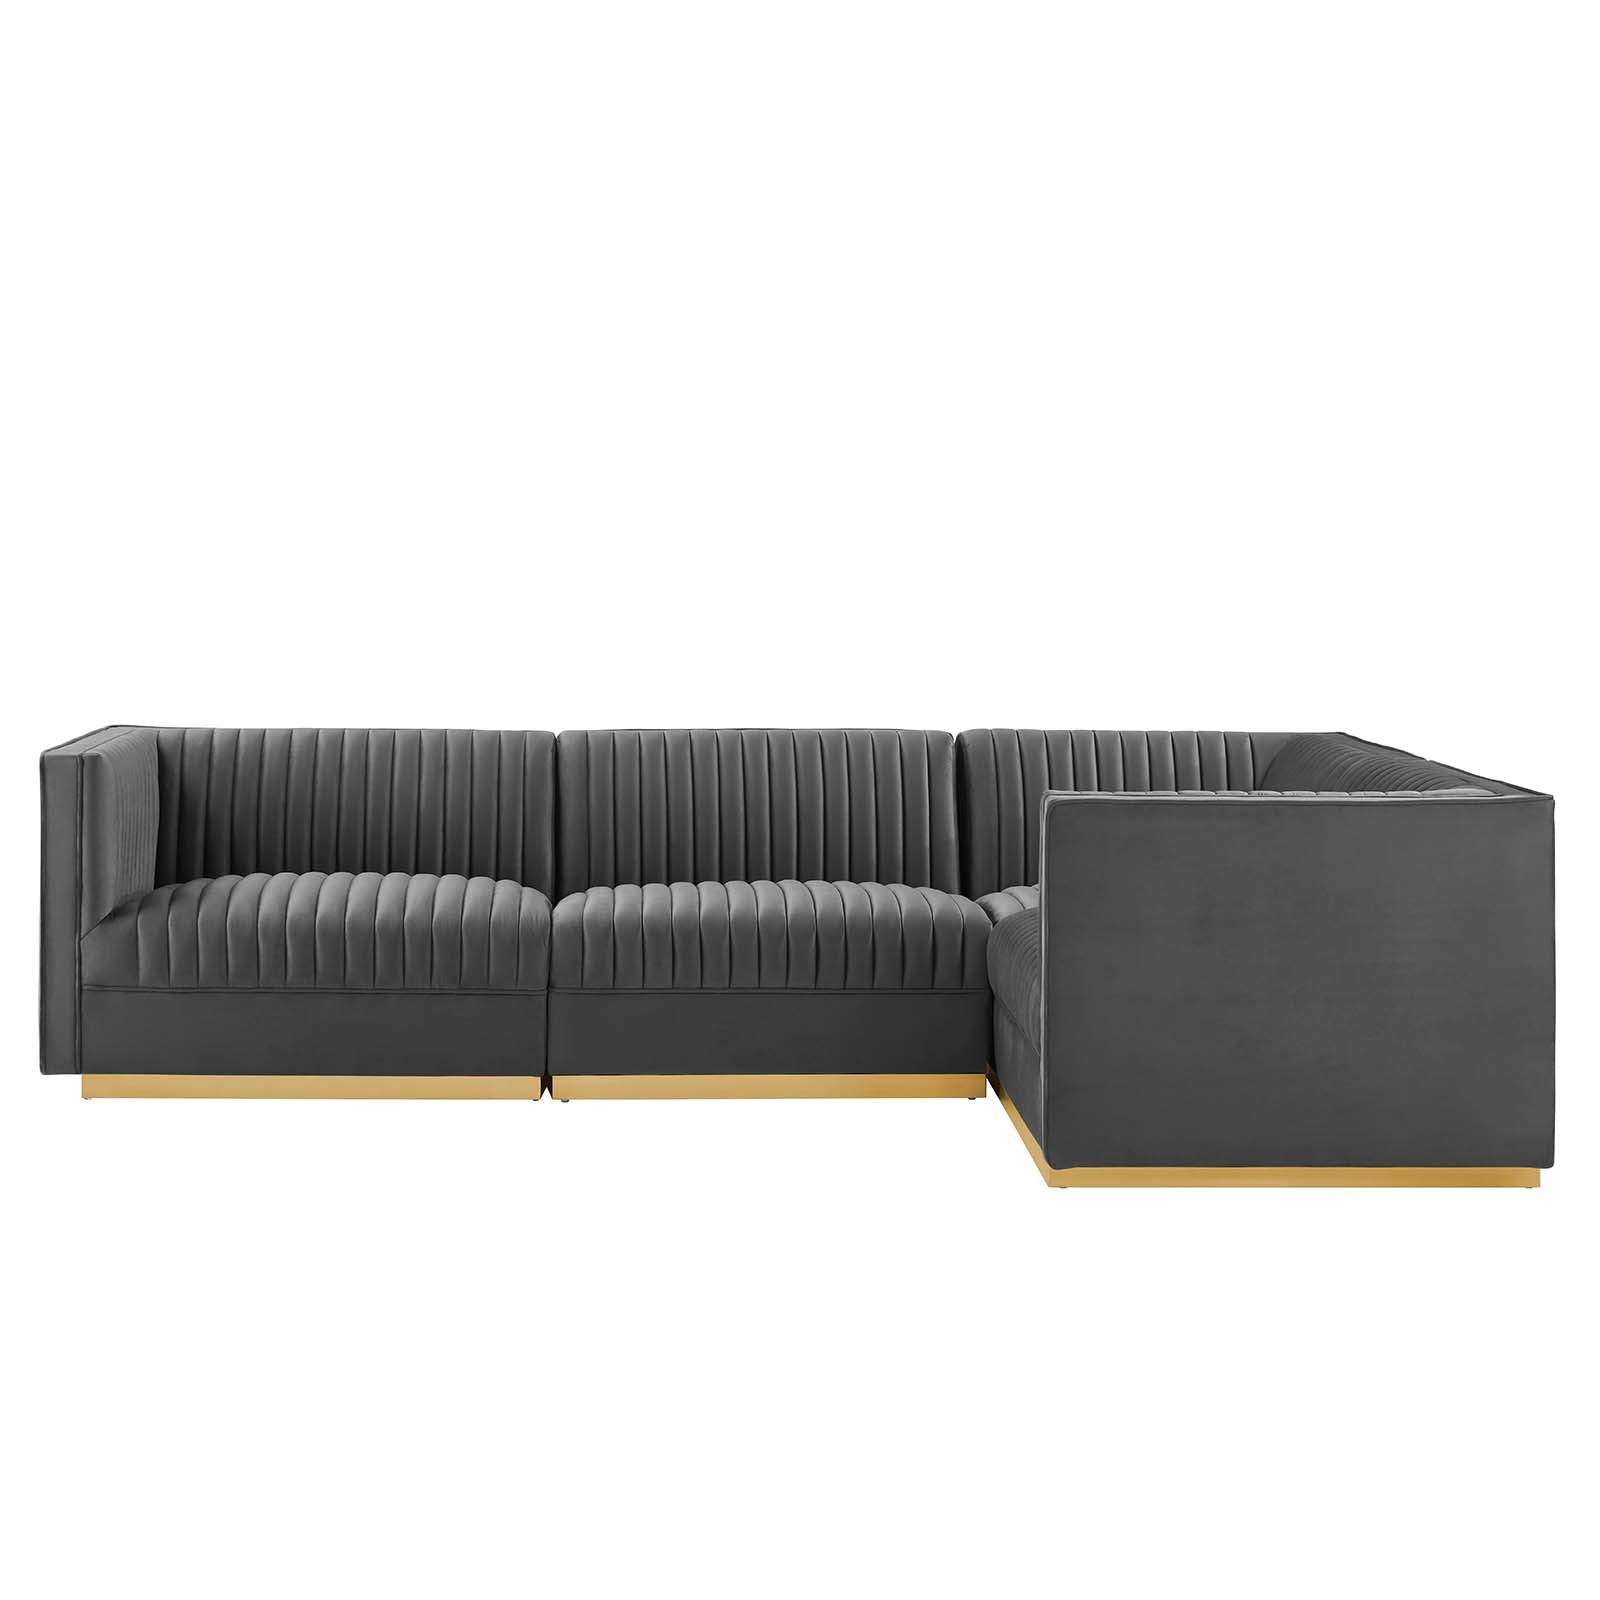 Sanguine Channel Tufted Performance Velvet 4-Piece Right-Facing Modular Sectional Sofa - East Shore Modern Home Furnishings